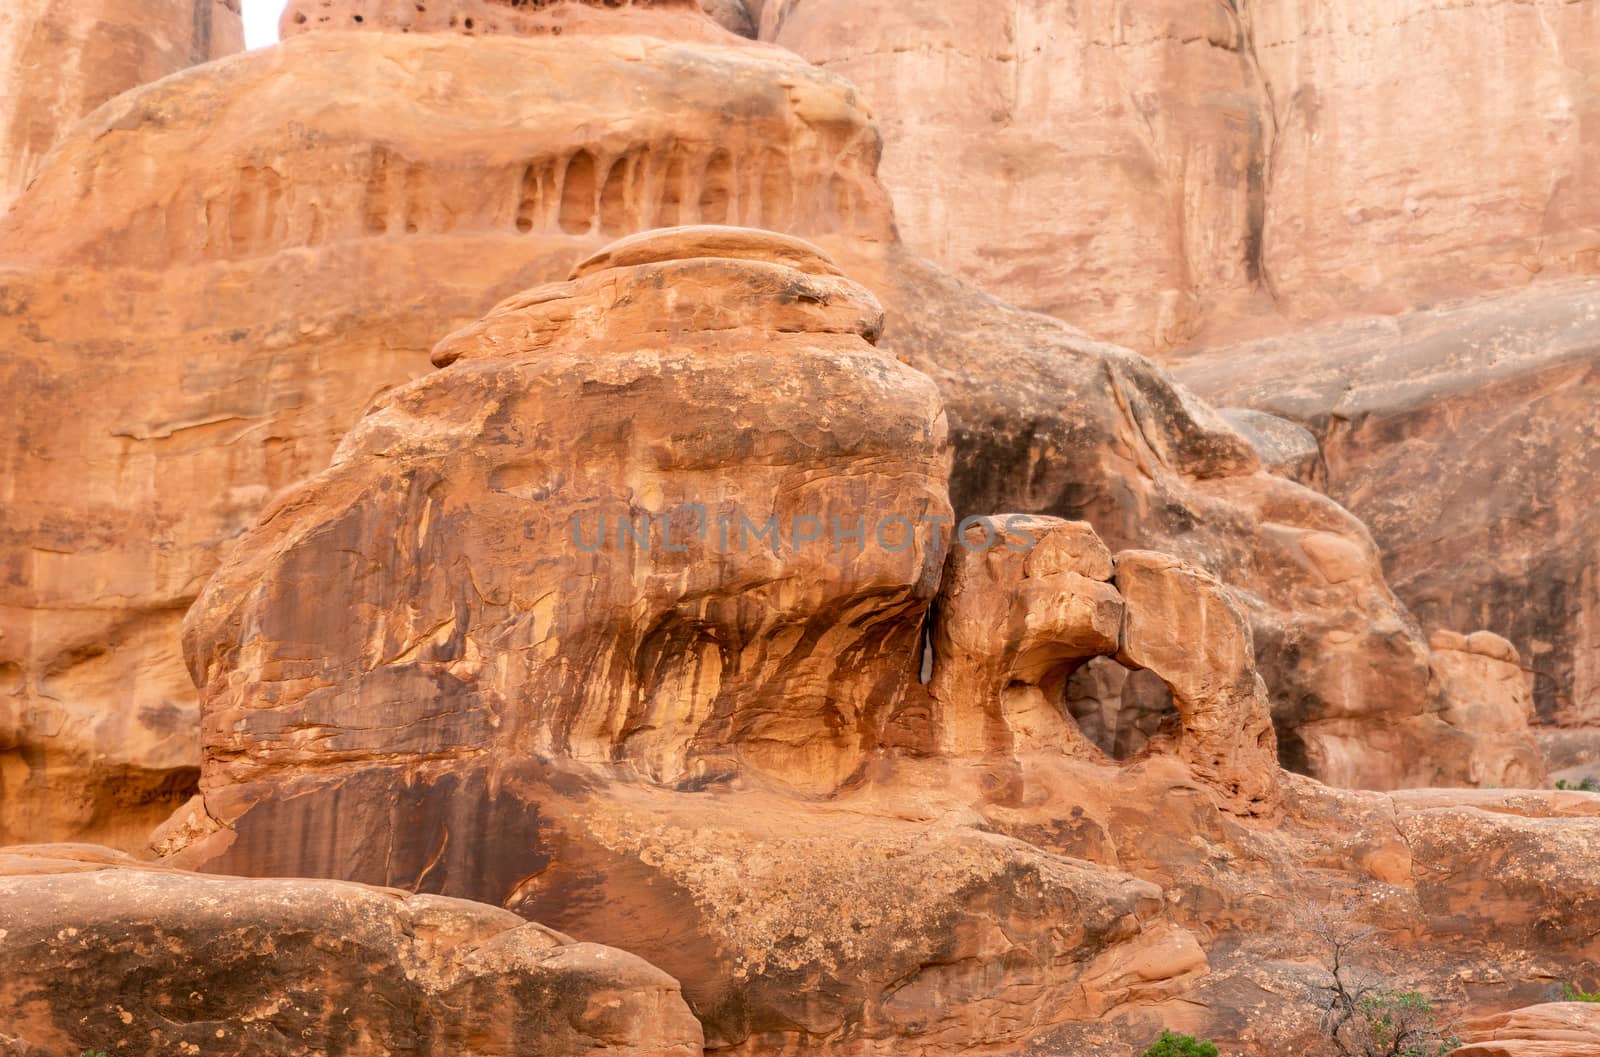 Sandstone formations in Fiery Furnace, Arches National Park, Utah by Njean